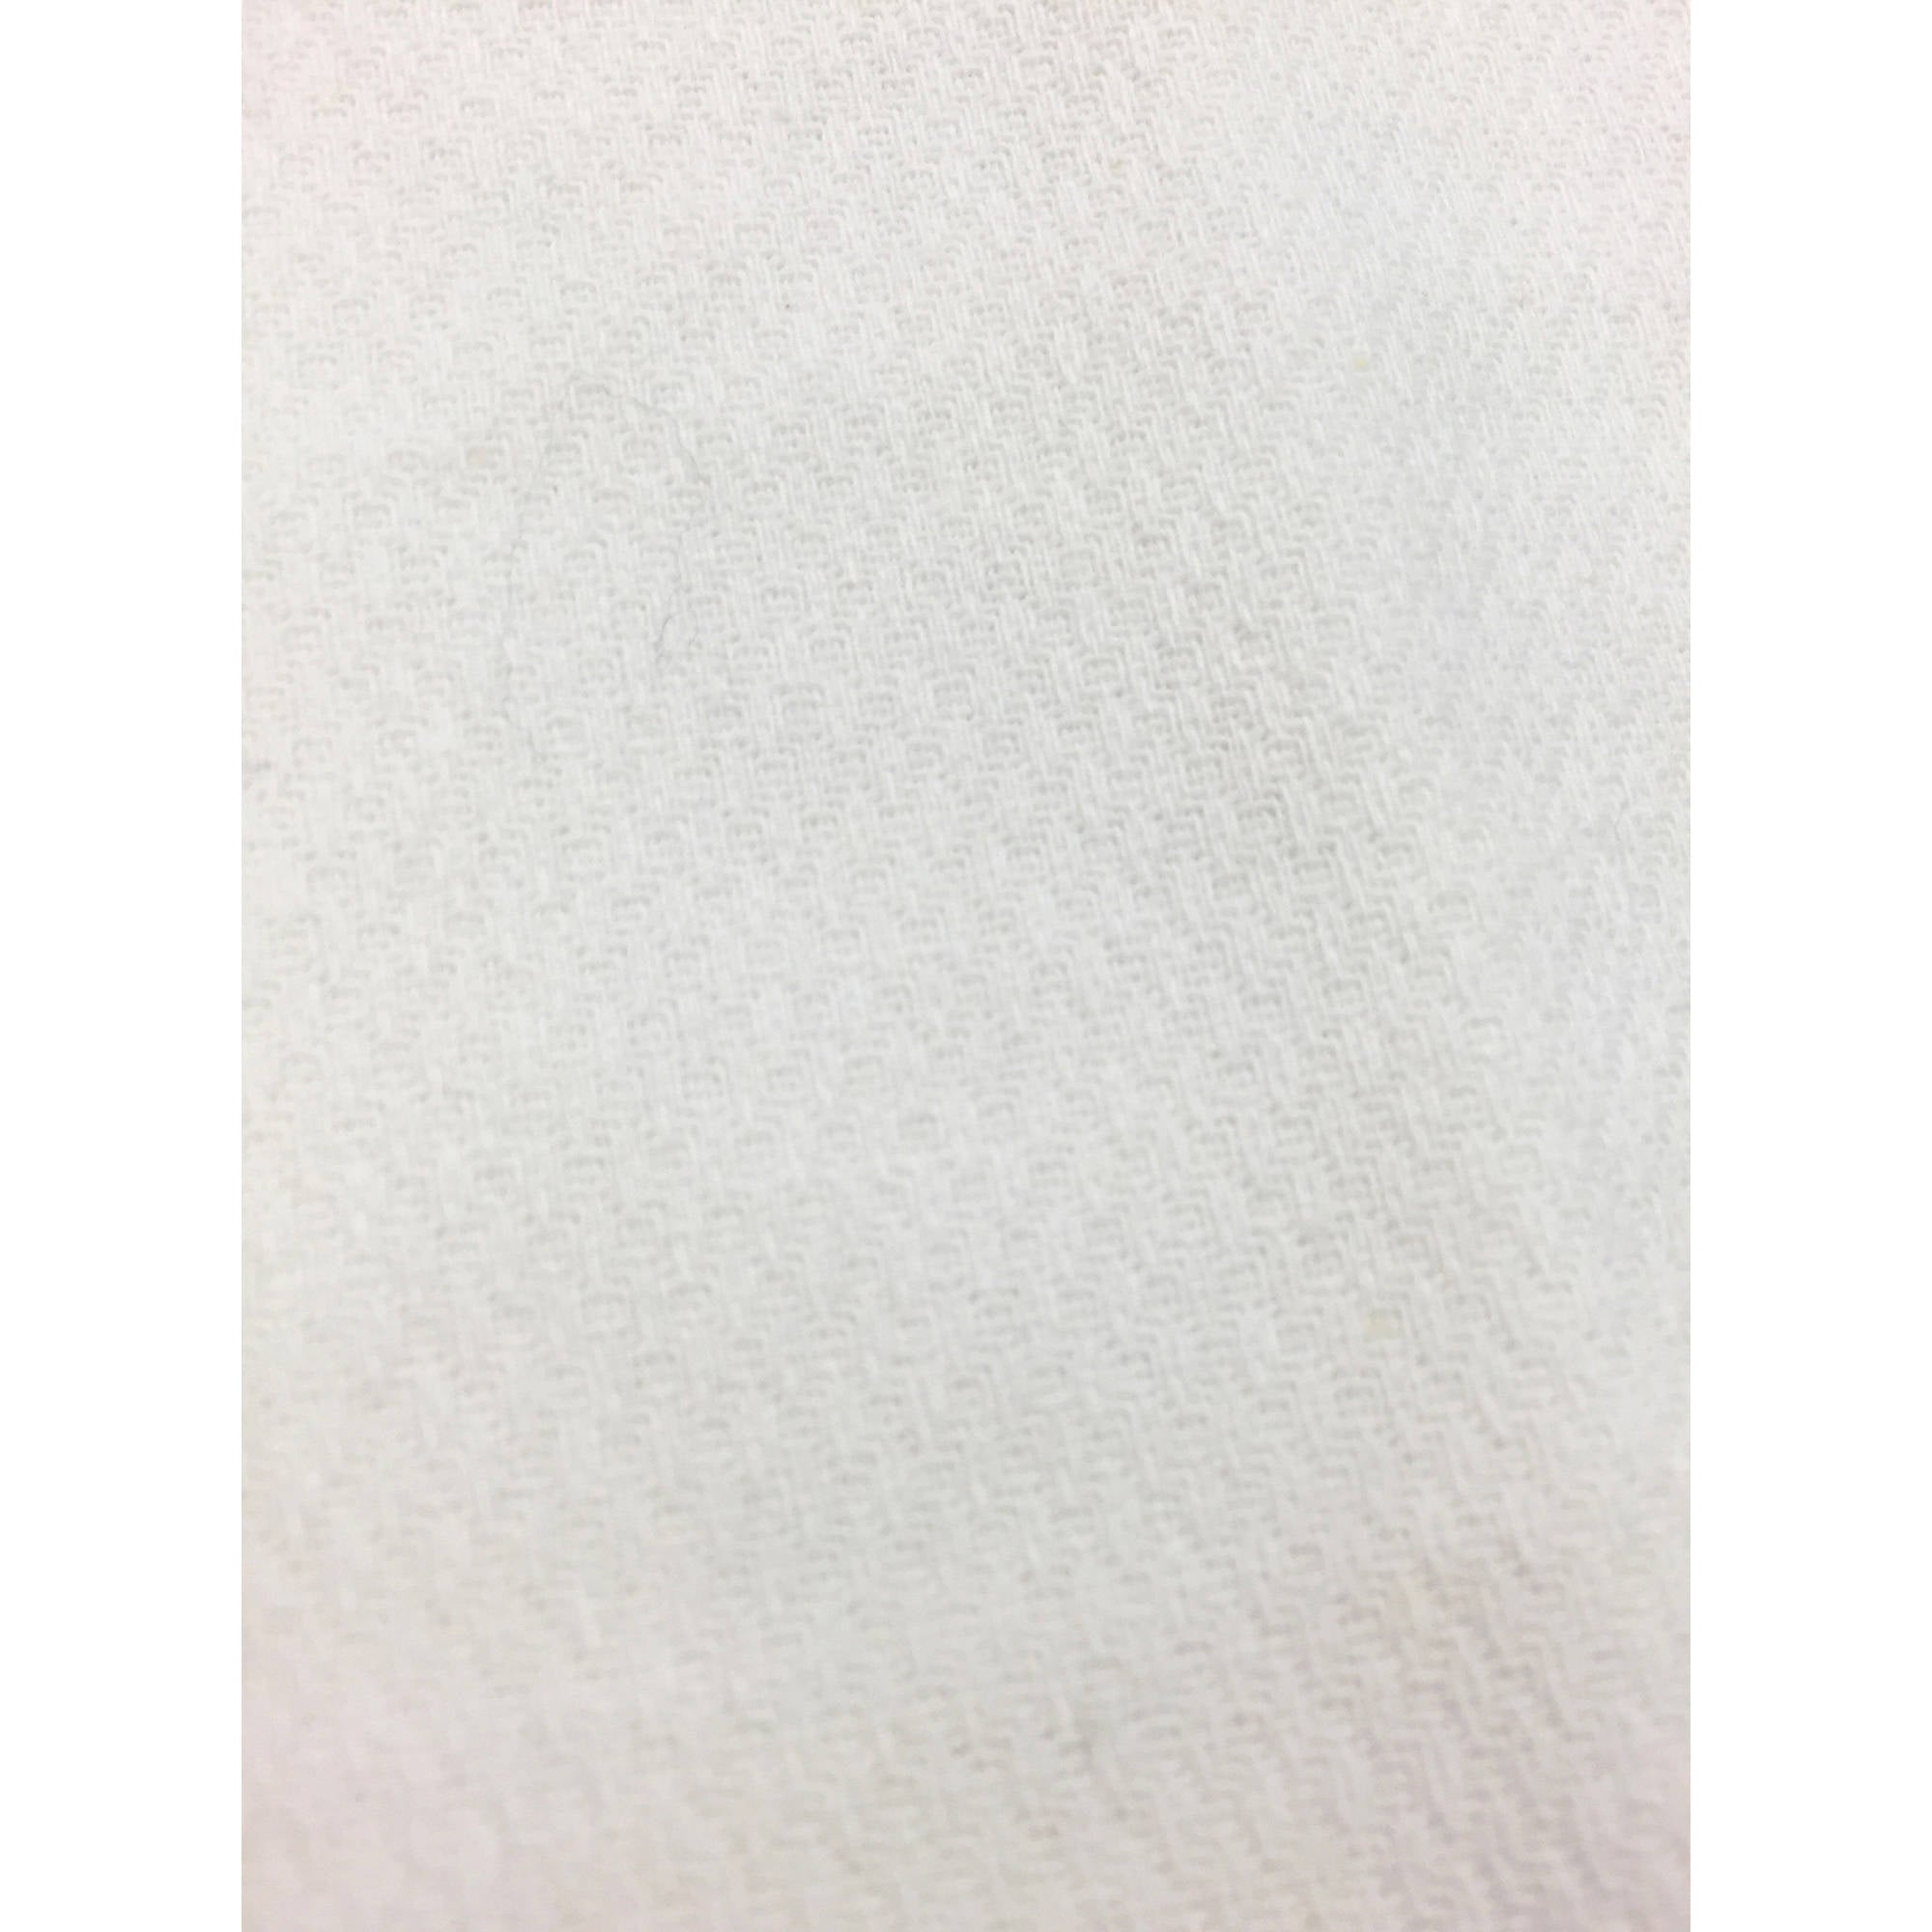 Waverly Inspirations 100% Cotton 36" Baby Diaper Cloth Fabric by the Yard, Off-White Color